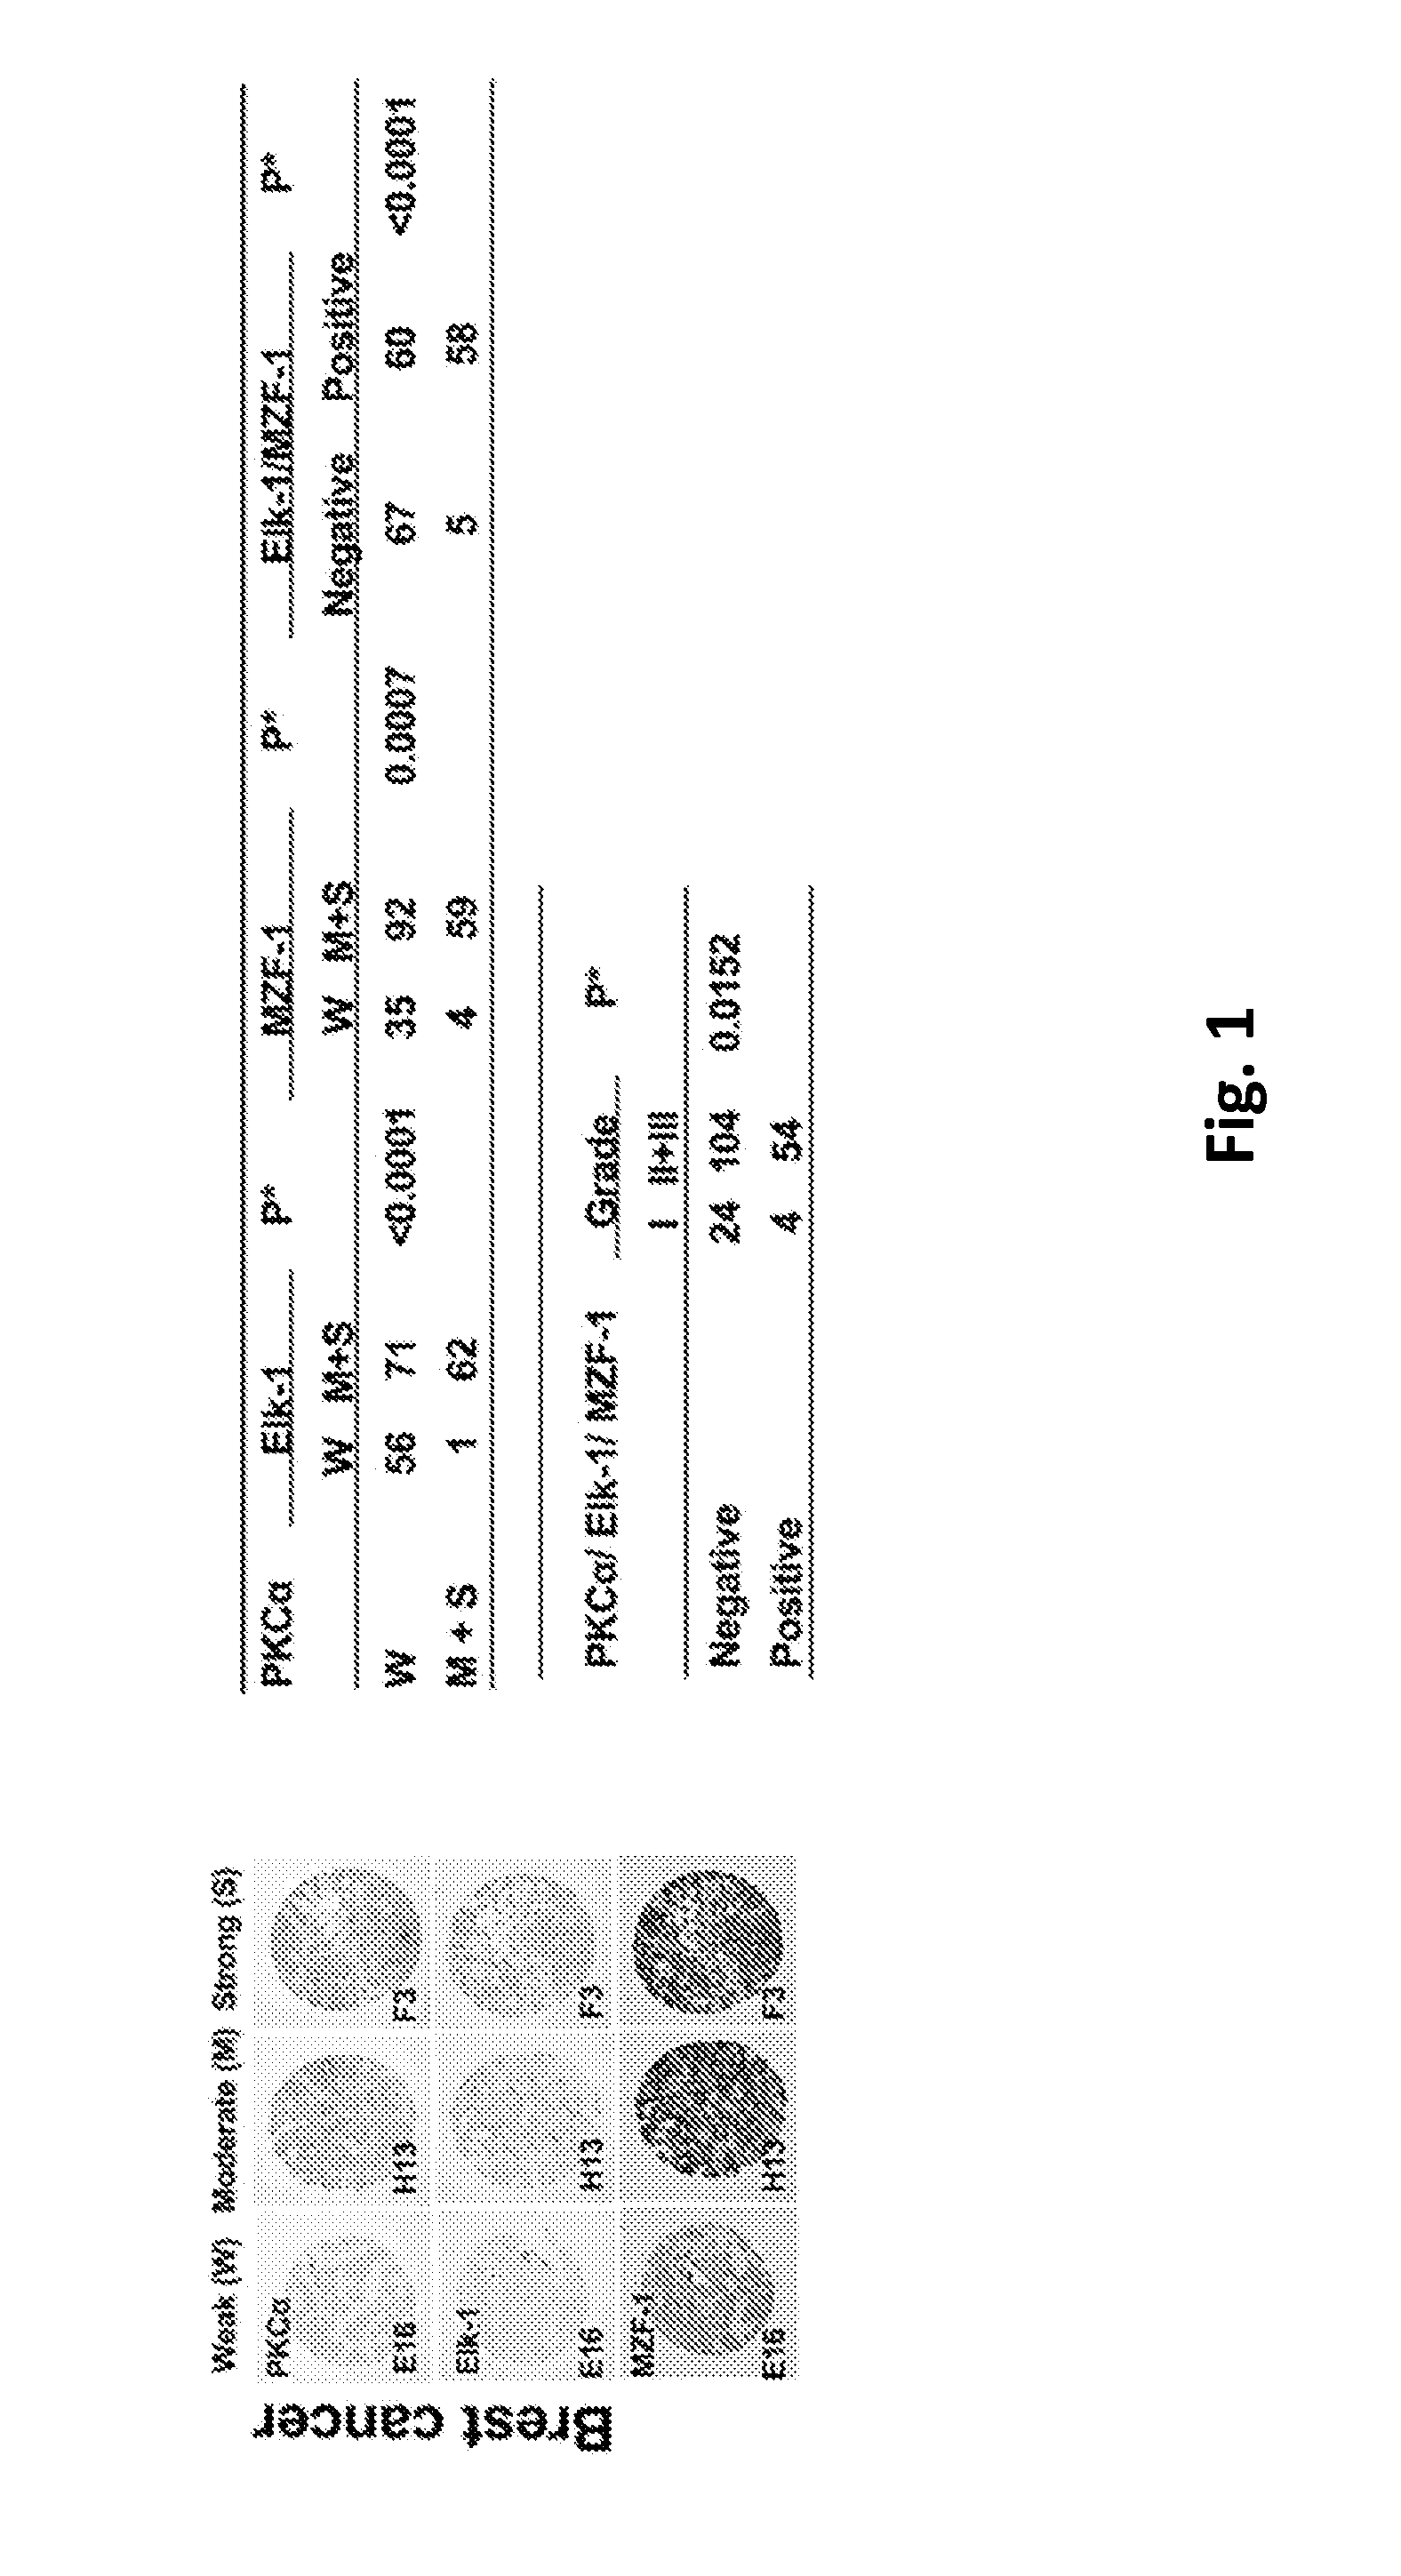 Pharmaceutical composition inhibiting interaction between MZF-1 and Elk-1